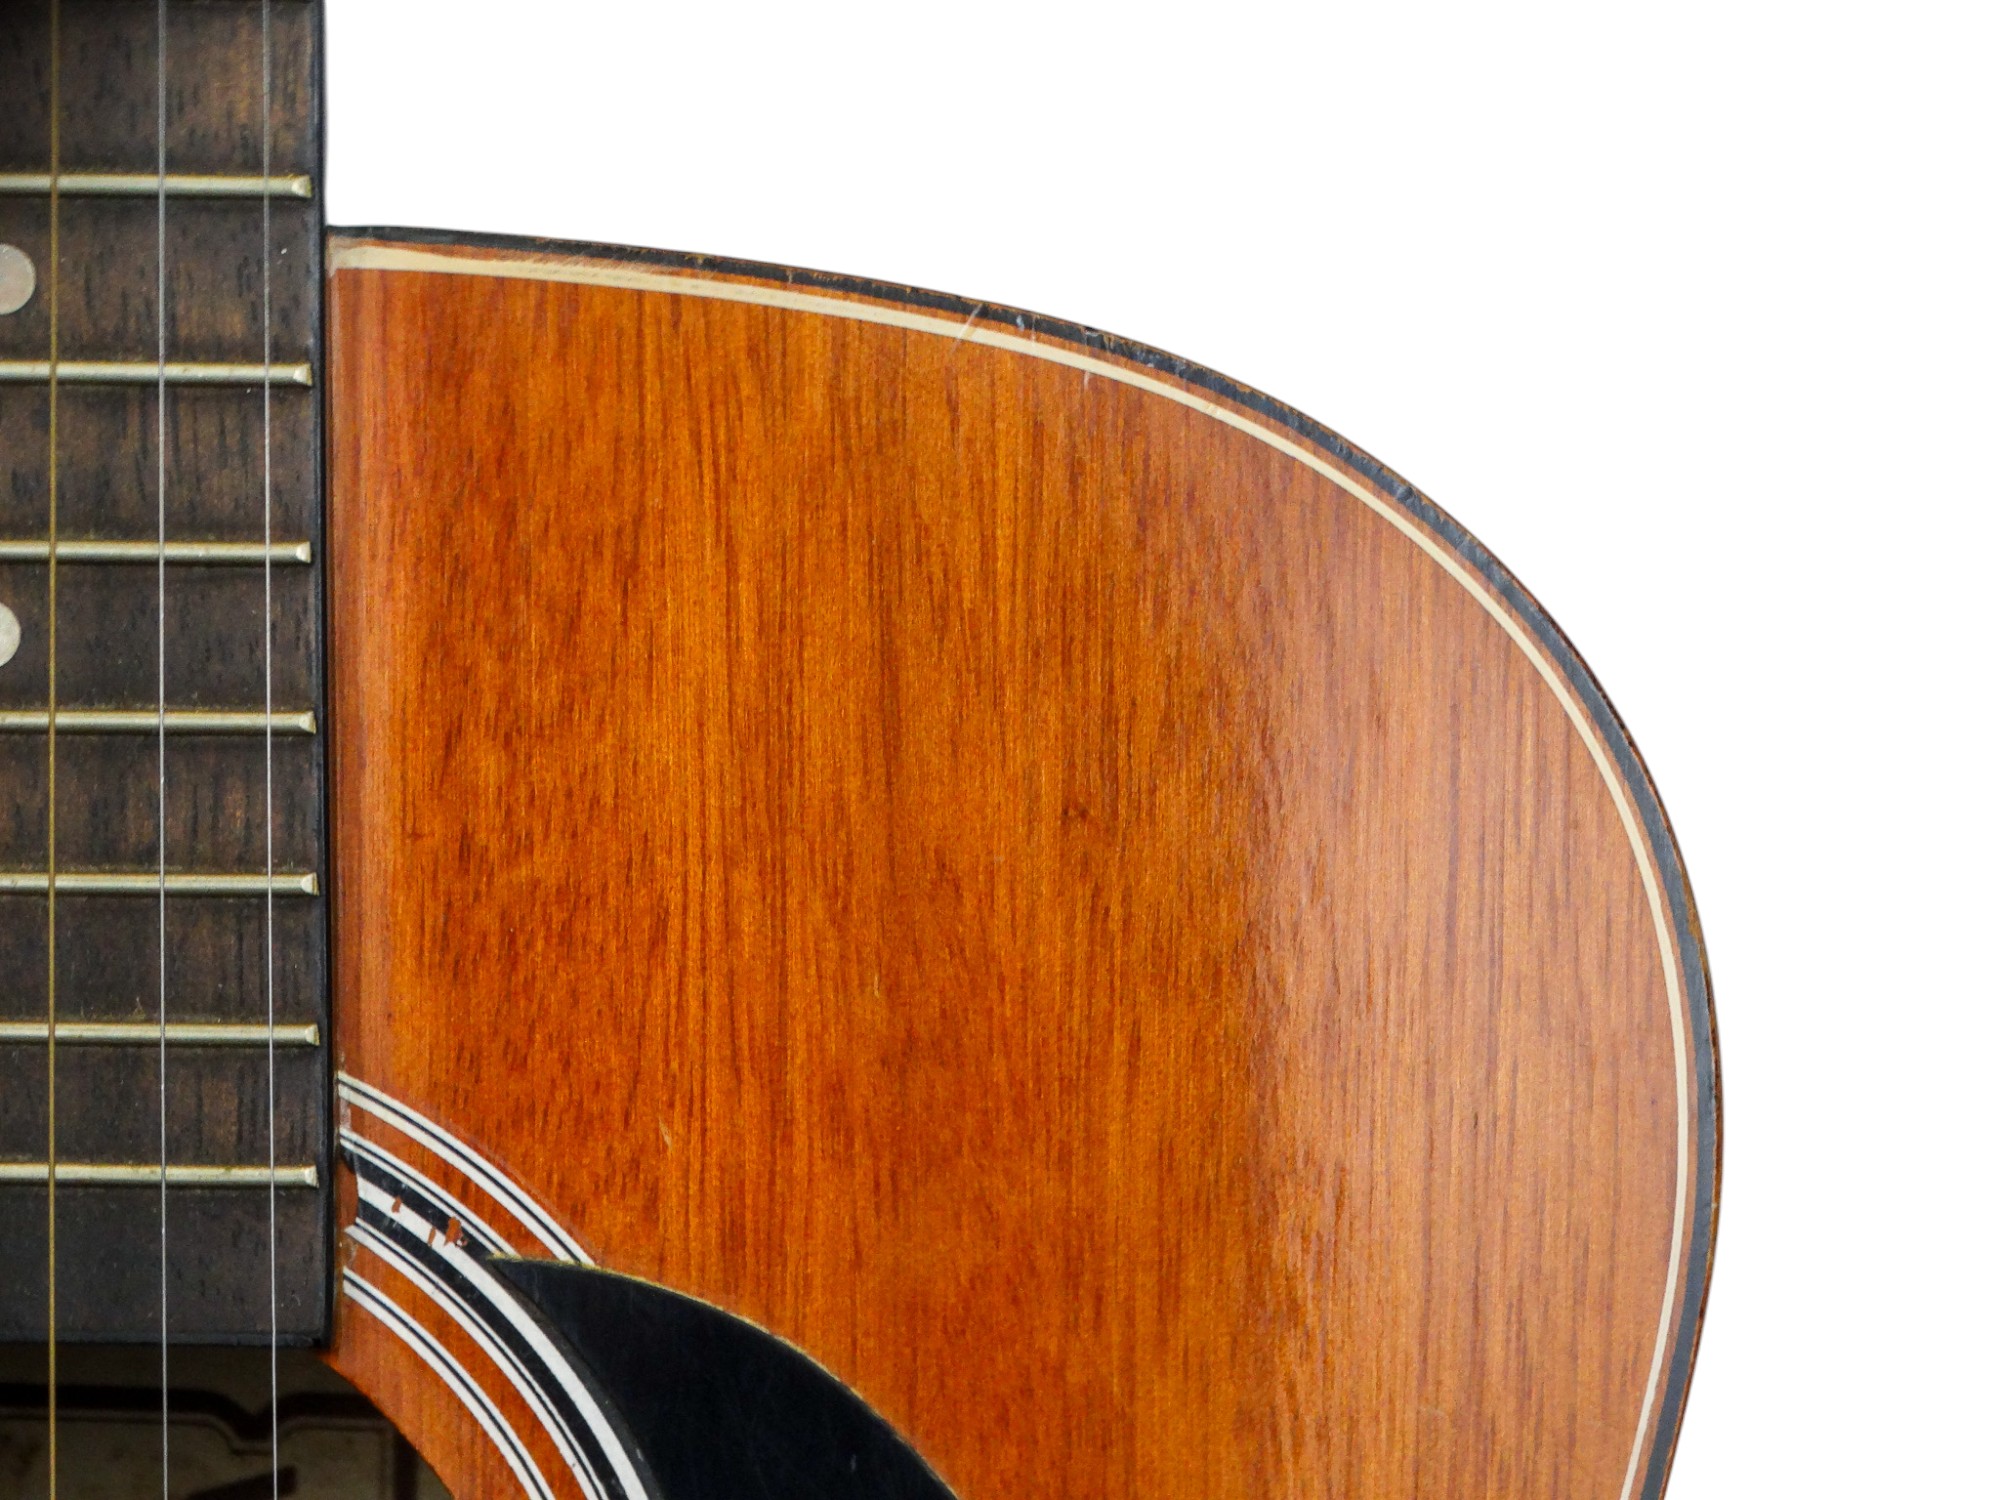 A Hondo II acoustic guitar - with soft case. - Image 3 of 7